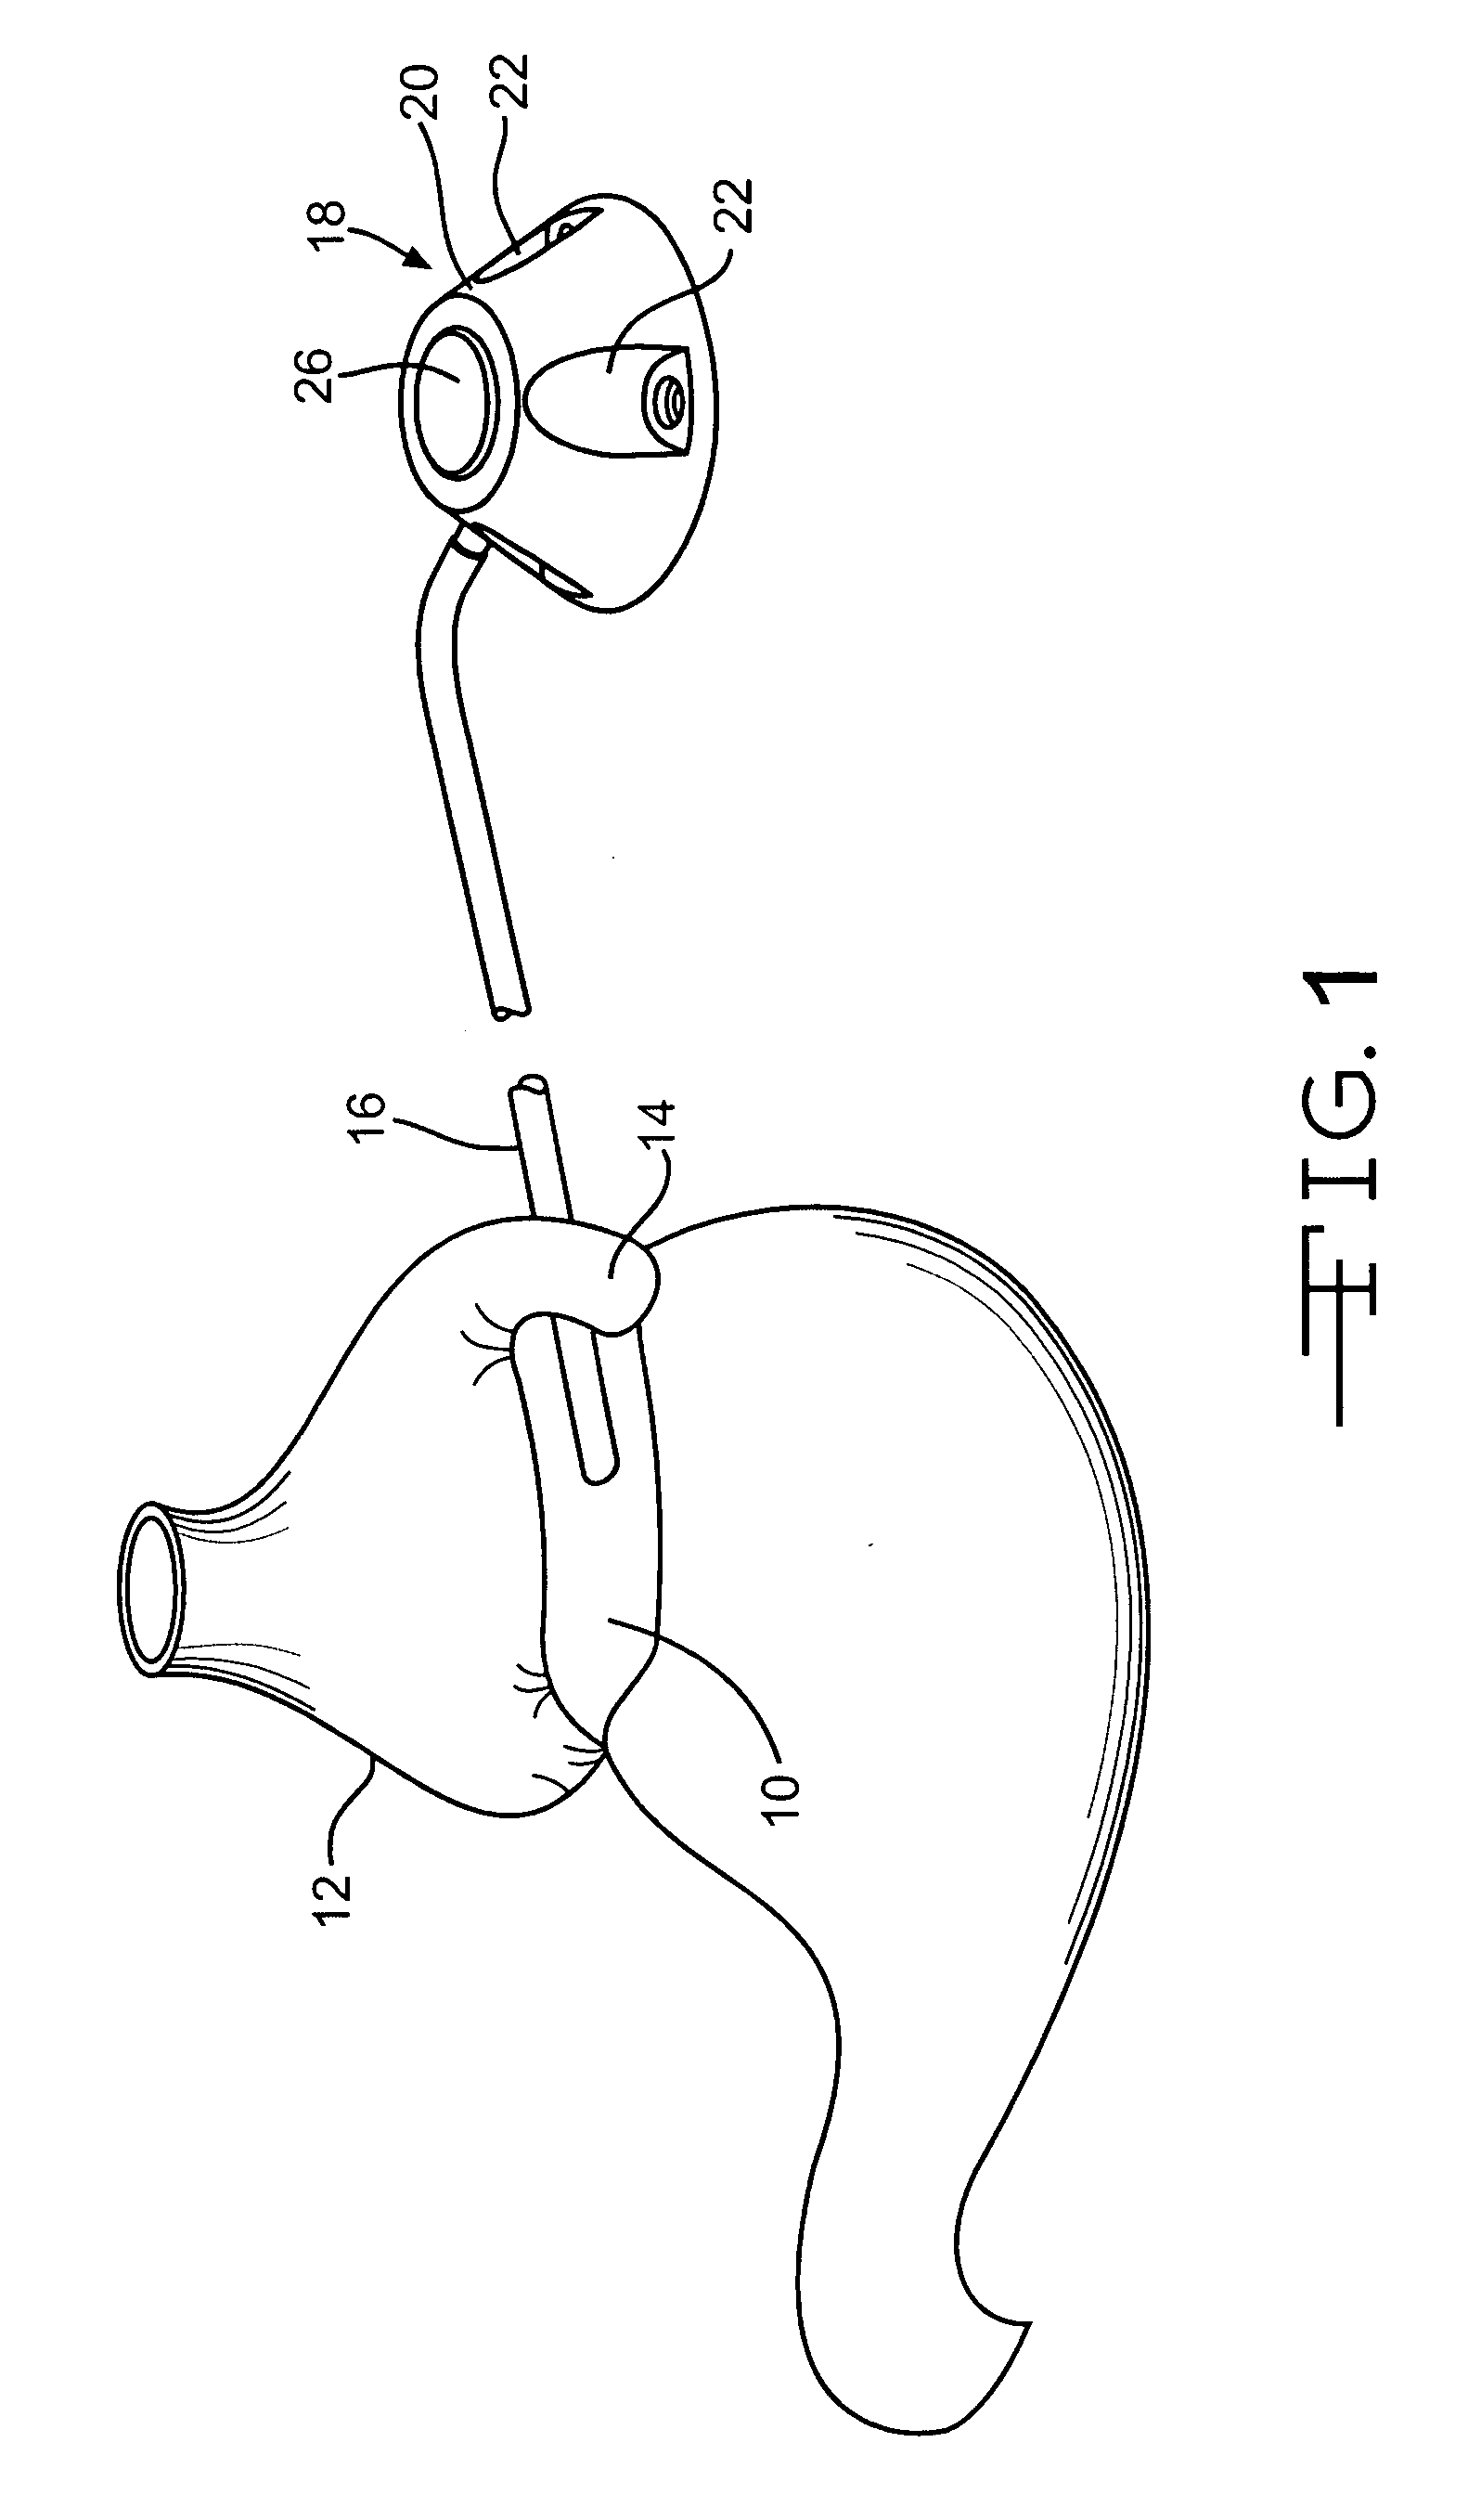 Subcutaneous injection port for applied fasteners